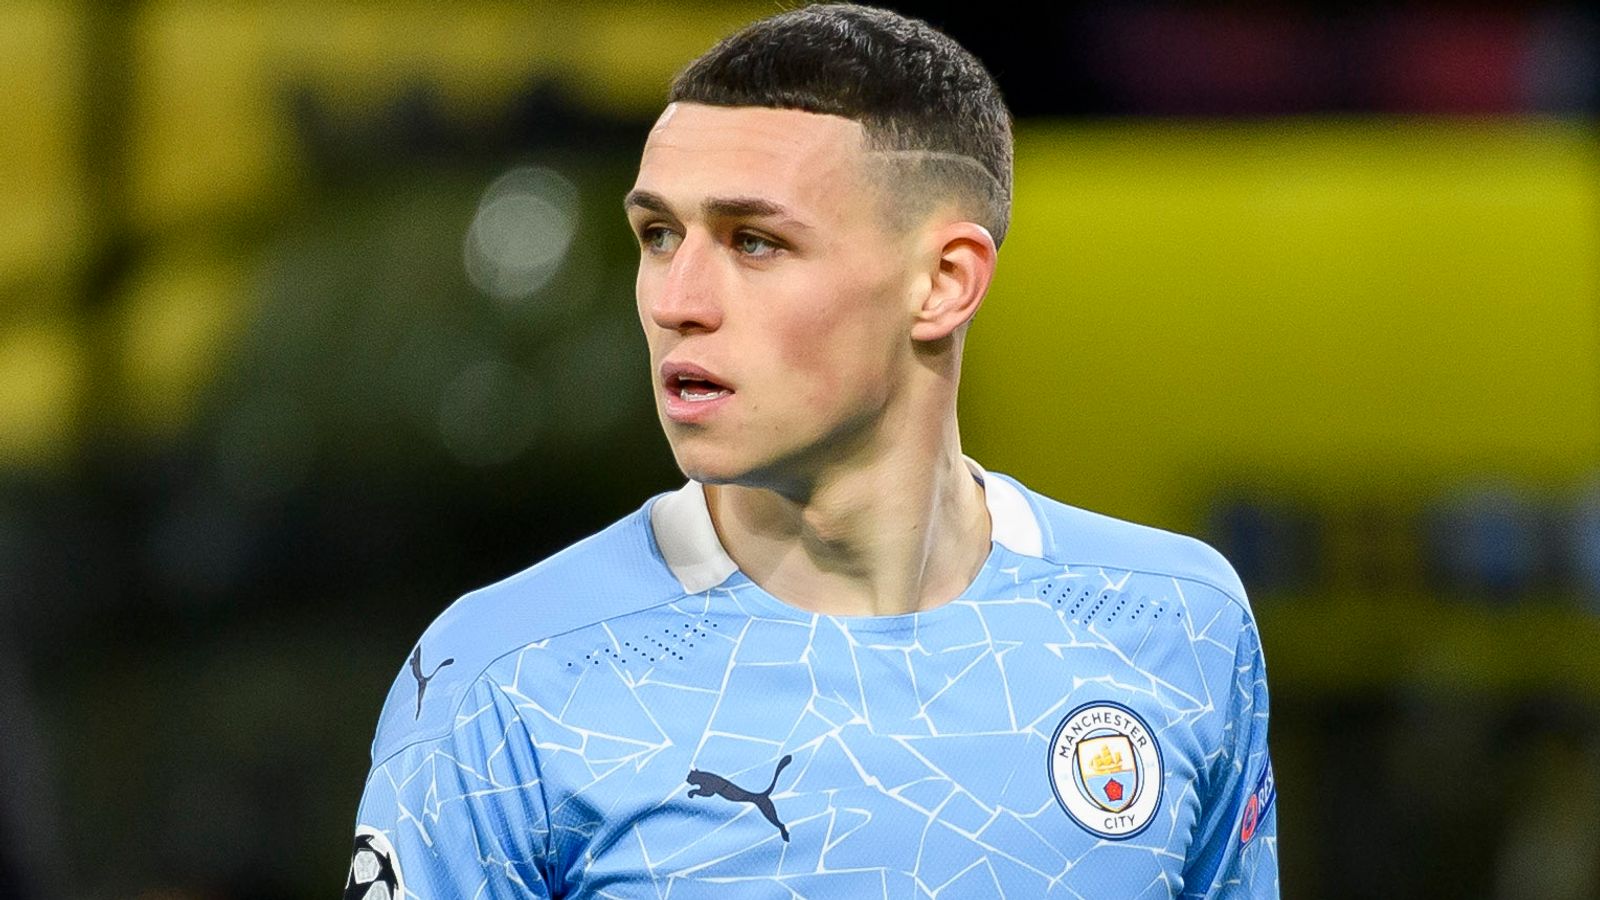 Premier League: Bad news for Champions Man City, Phil Foden ruled out